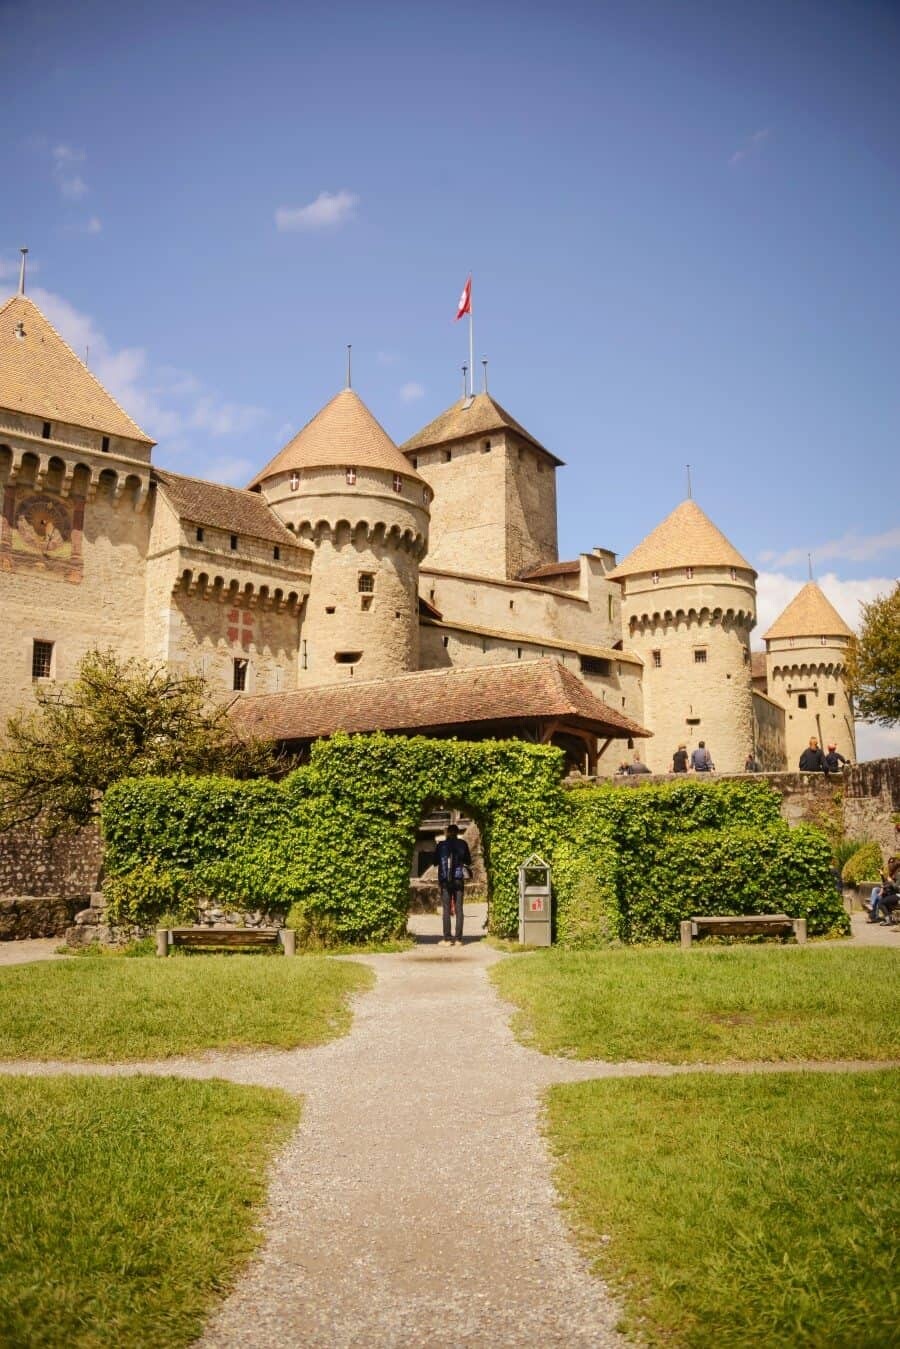 Chateau de Chillon, Switzerland Travel by The Wandering Lens 11